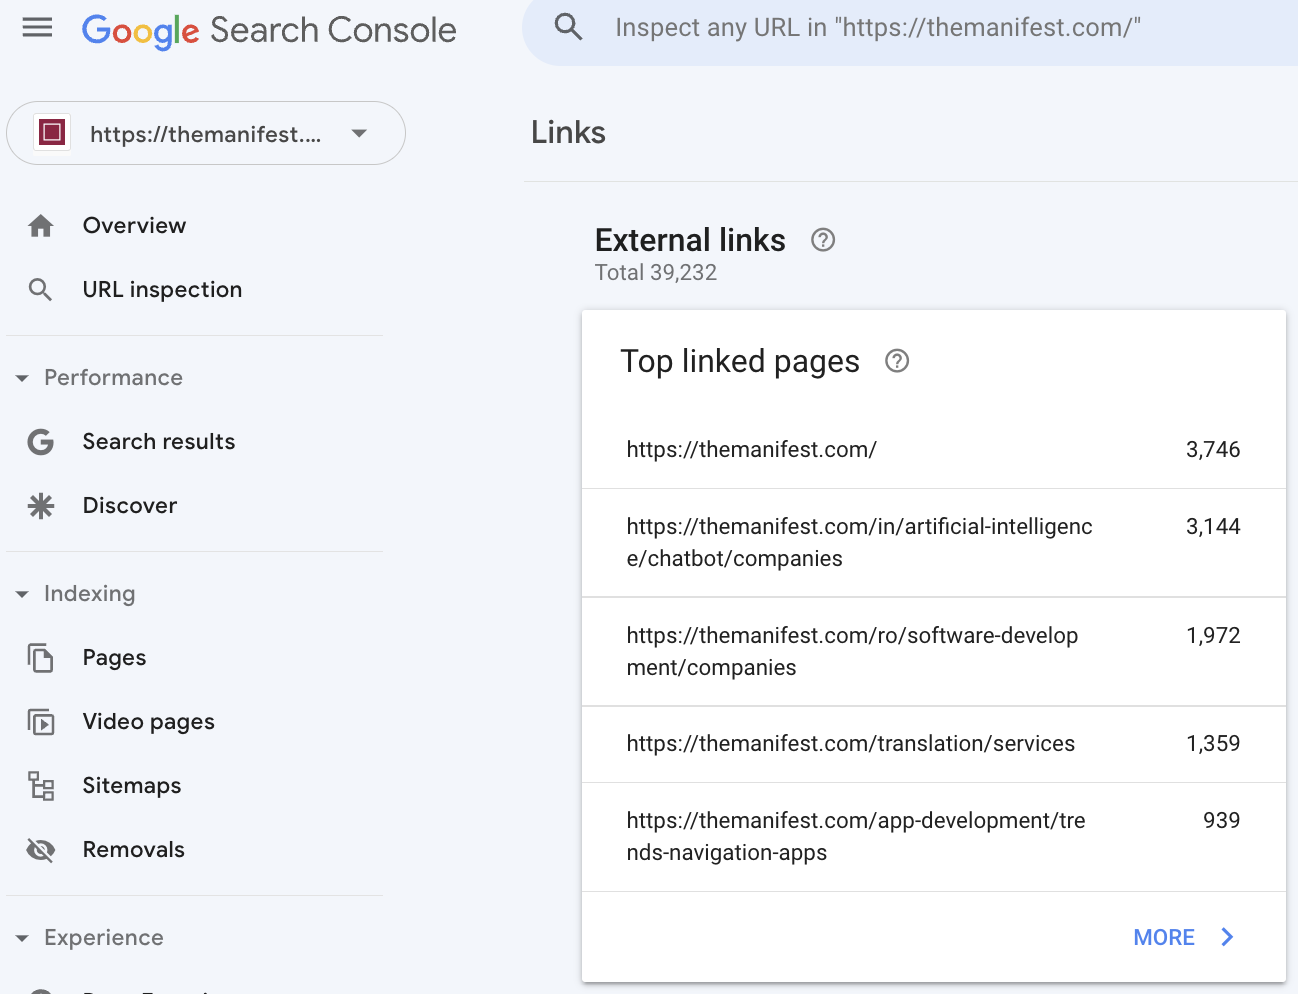 example of Google Search Console SEO tool